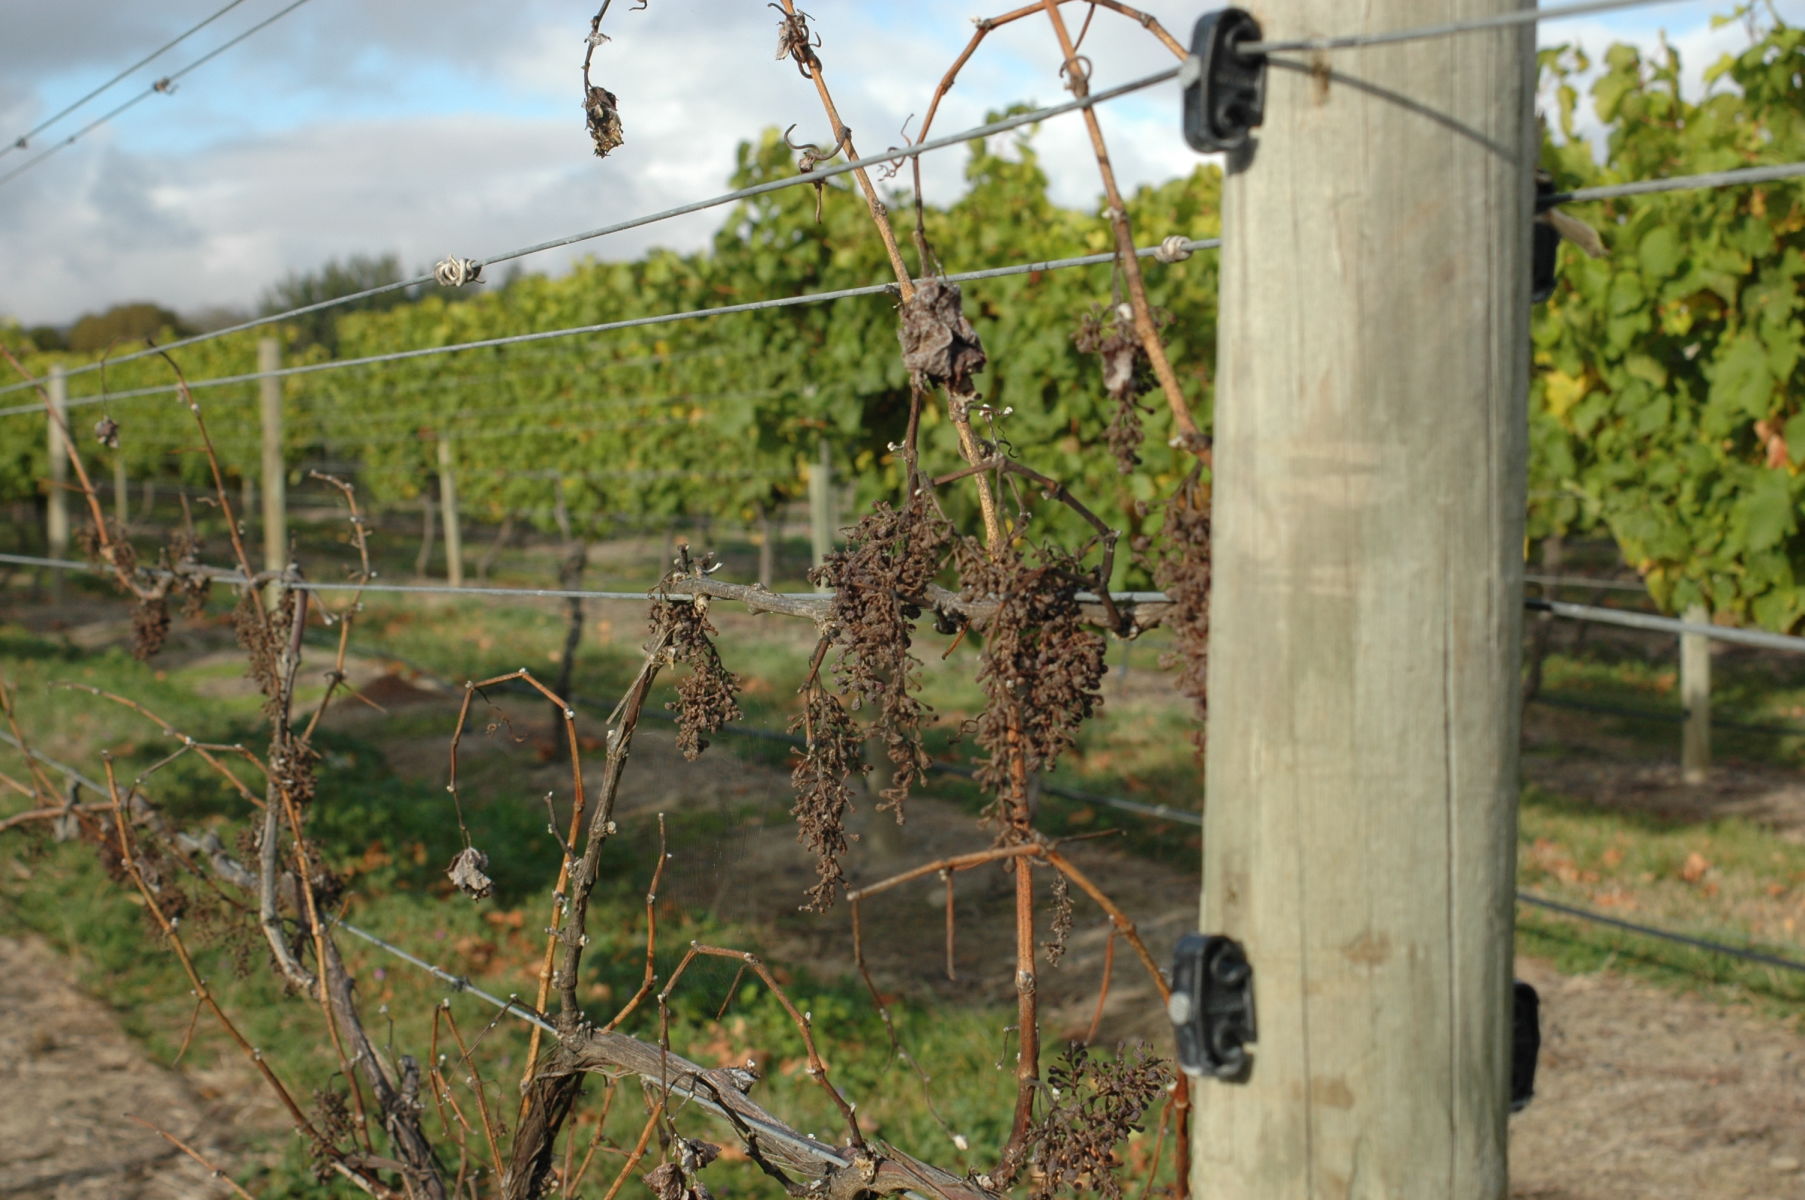 Student research is developing grapevine and wine research capability